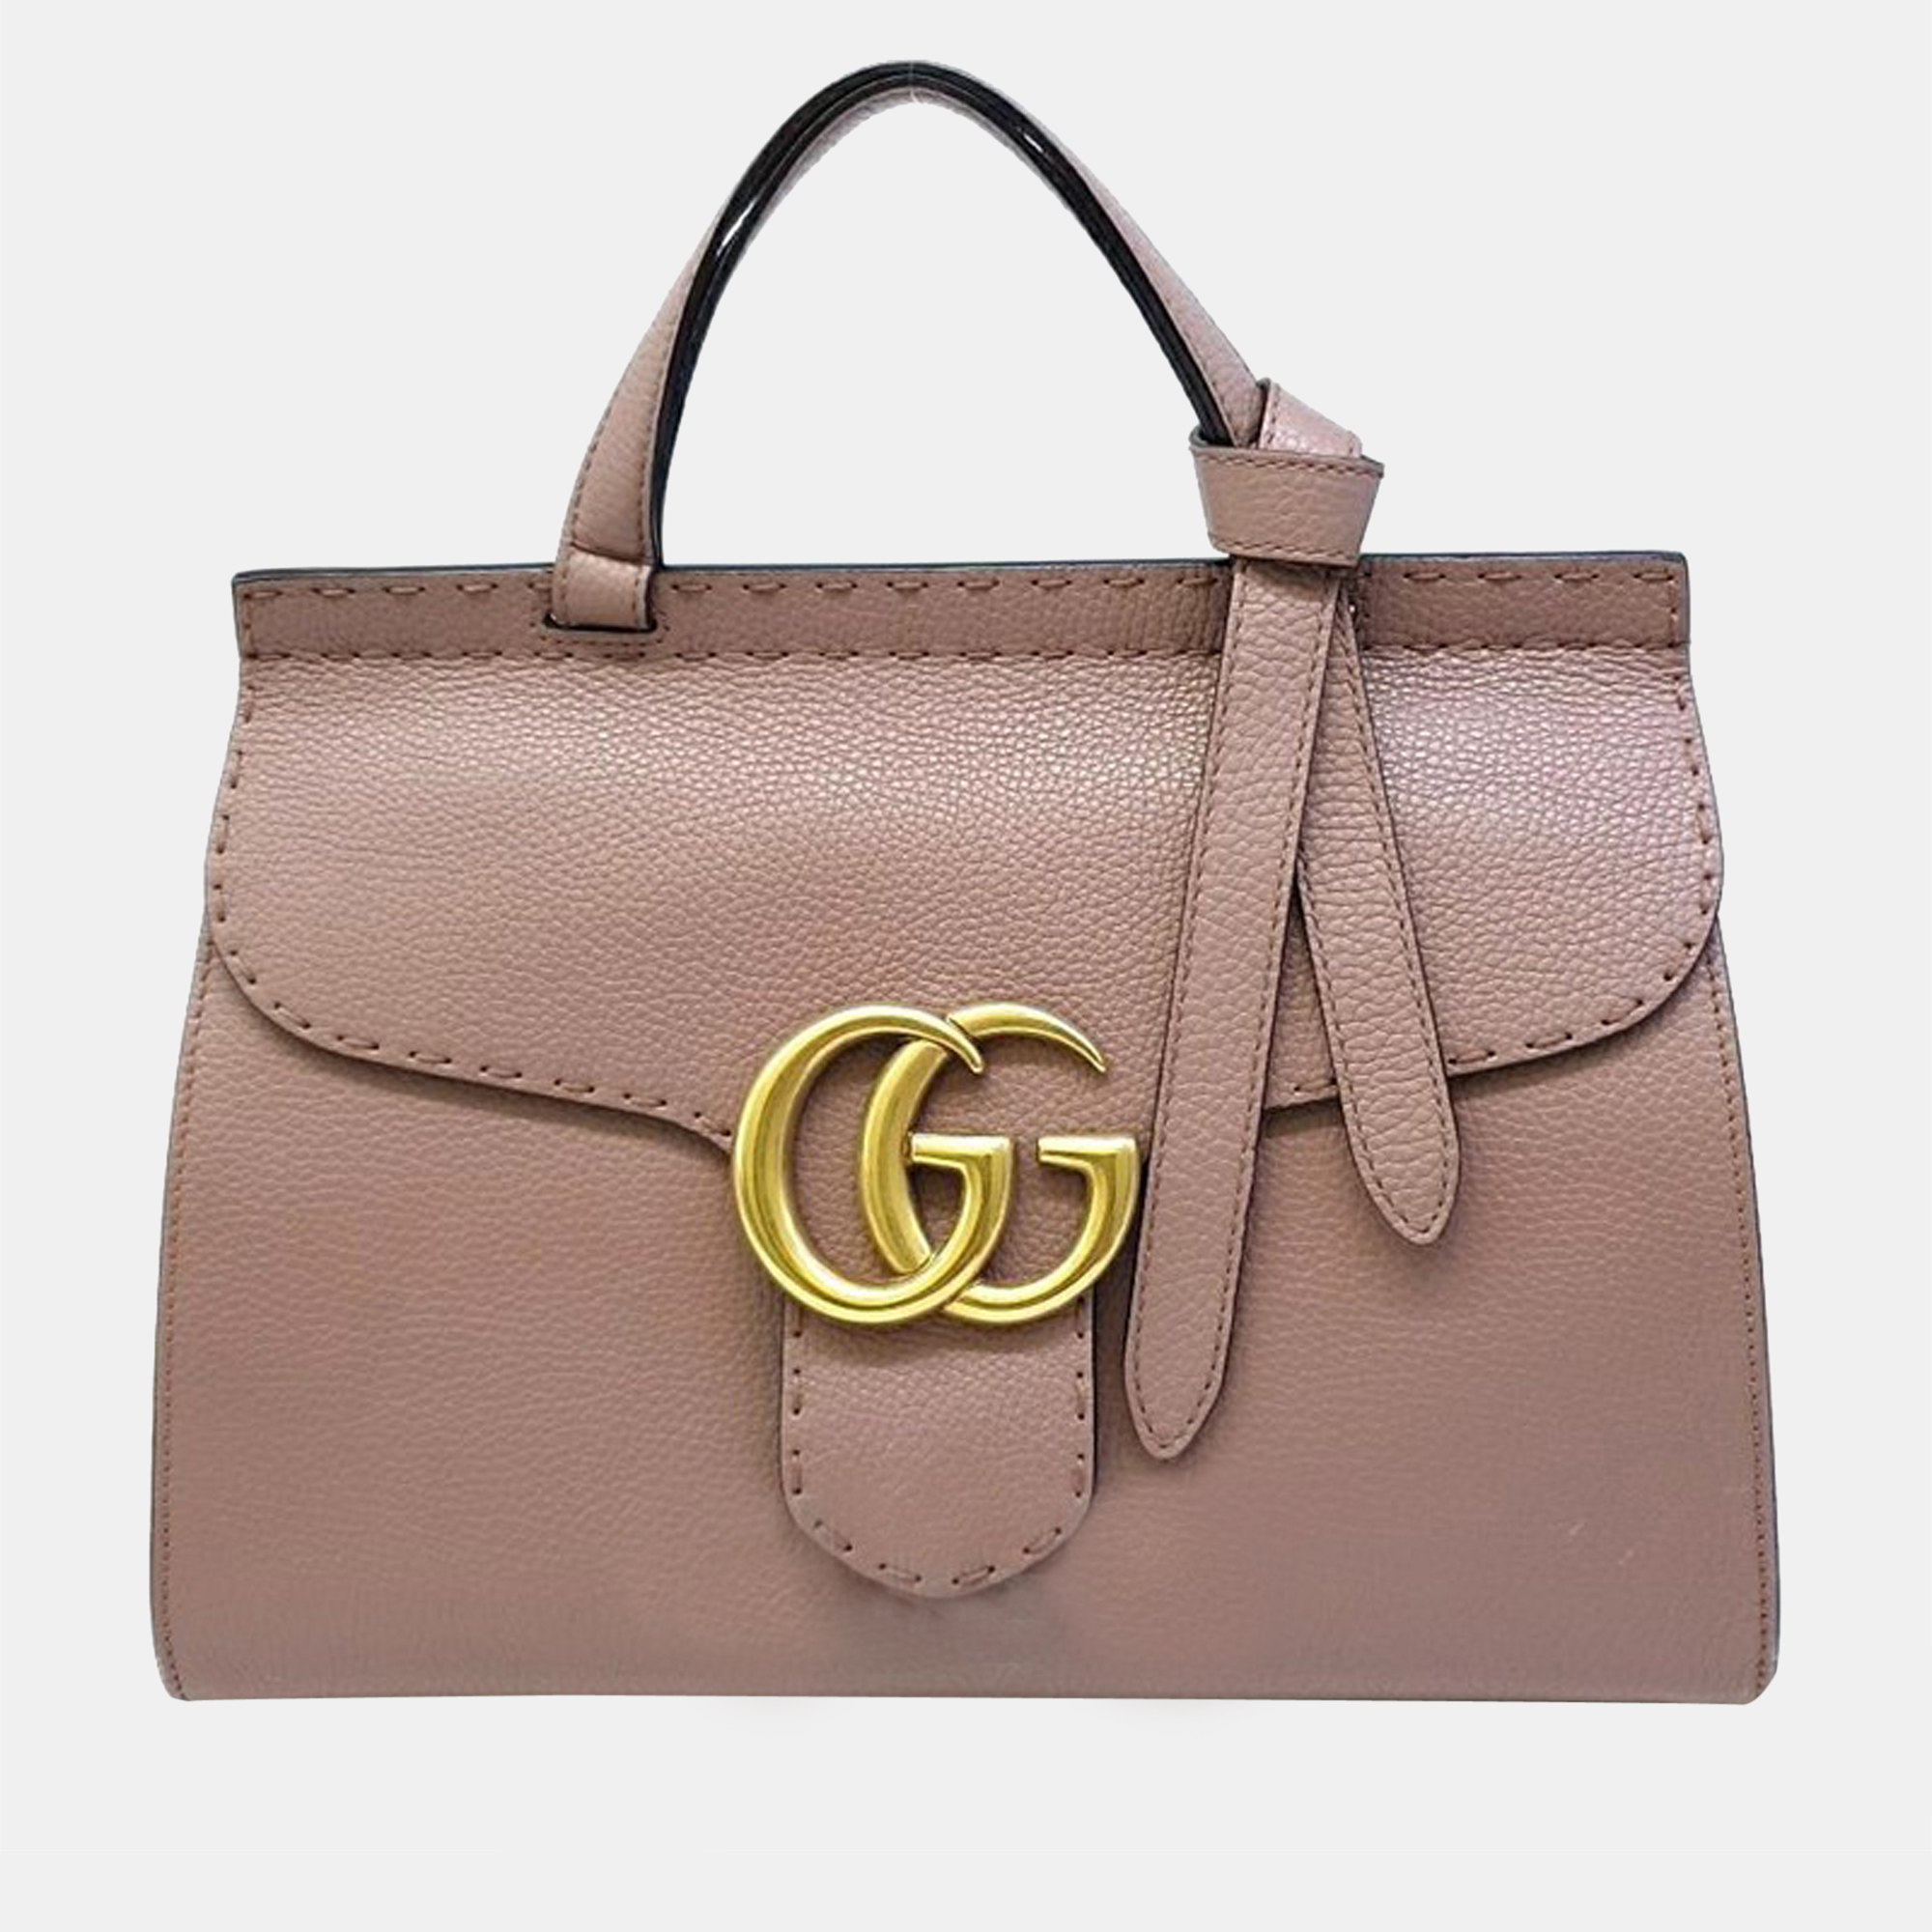 Gucci pink leather gg marmont top handle bag